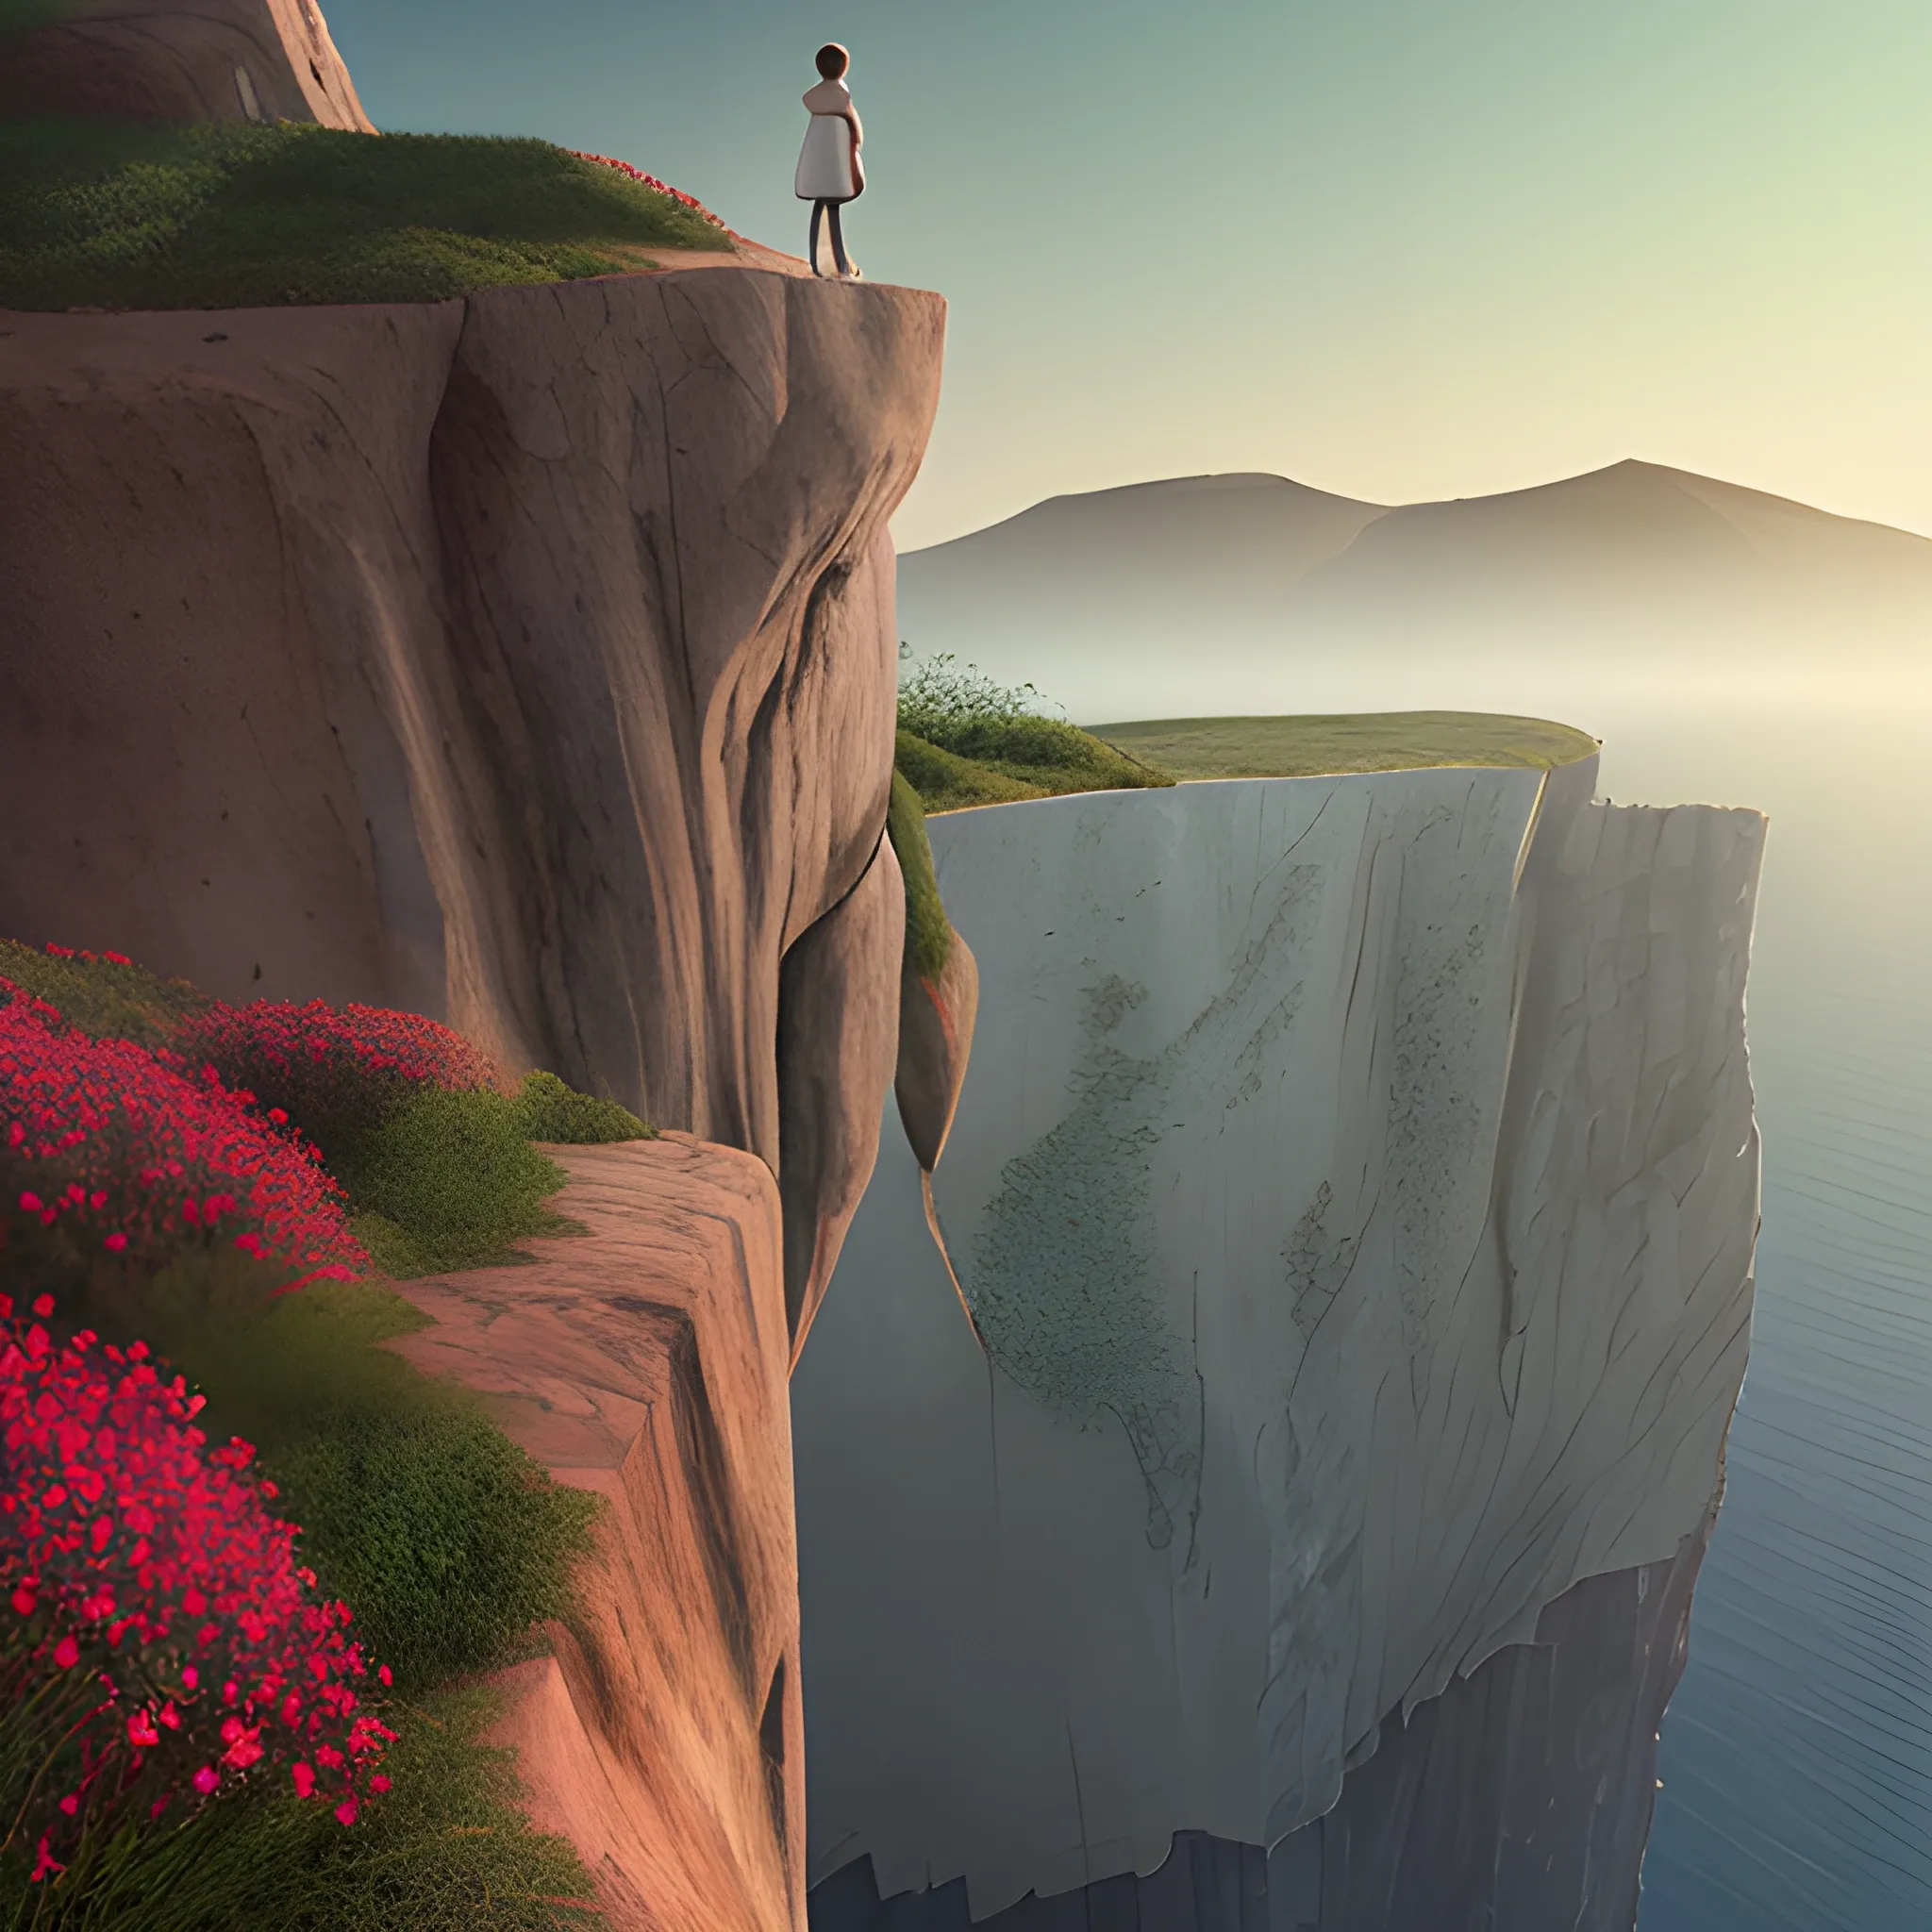 person standing on a cliff looking to a beautiful landscape, digital art
, 3D